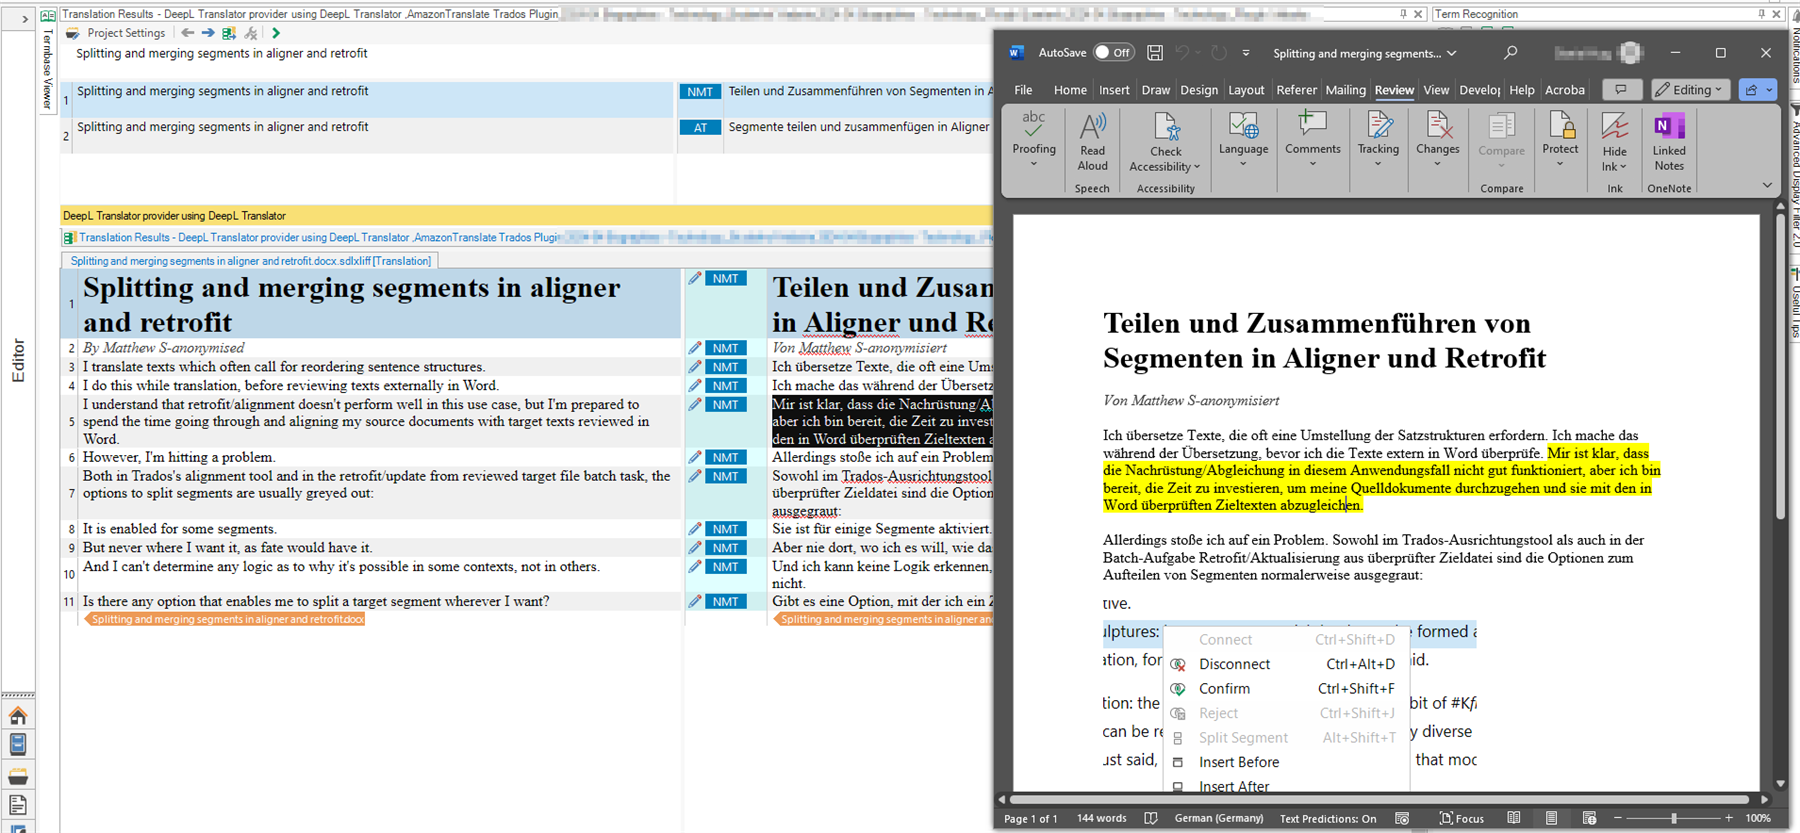 Screenshot of Trados Studio interface showing a forum post by Matthew S-anonymised discussing segmentation issues in alignment and retrofit, with a side-by-side comparison of English and German text segments.